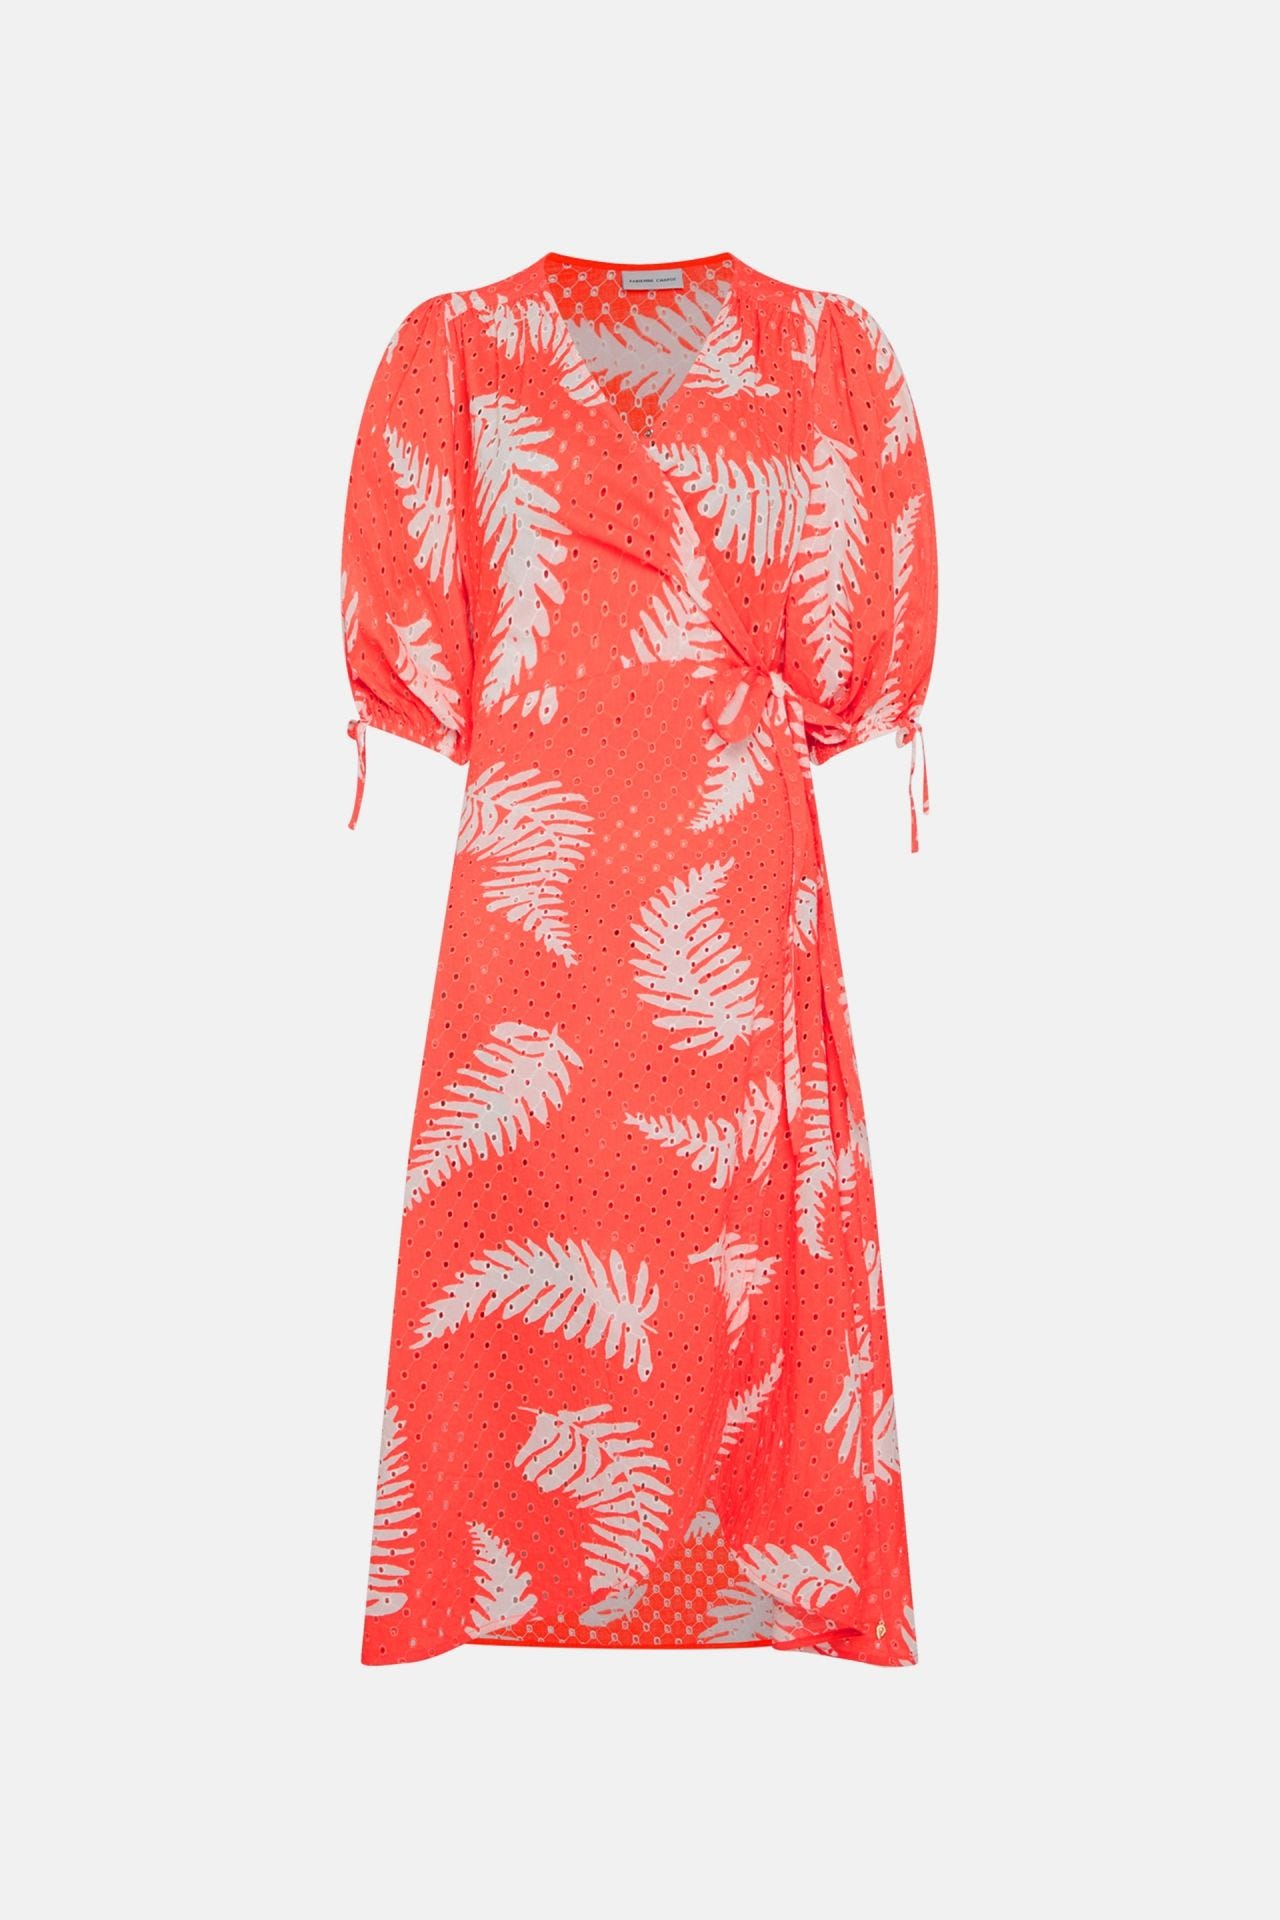 A Fabienne Chapot Charlie Broderie Dress - Hot Coral made of 100% GOTS-certified cotton, featuring a v-neckline and a red and white fern print.